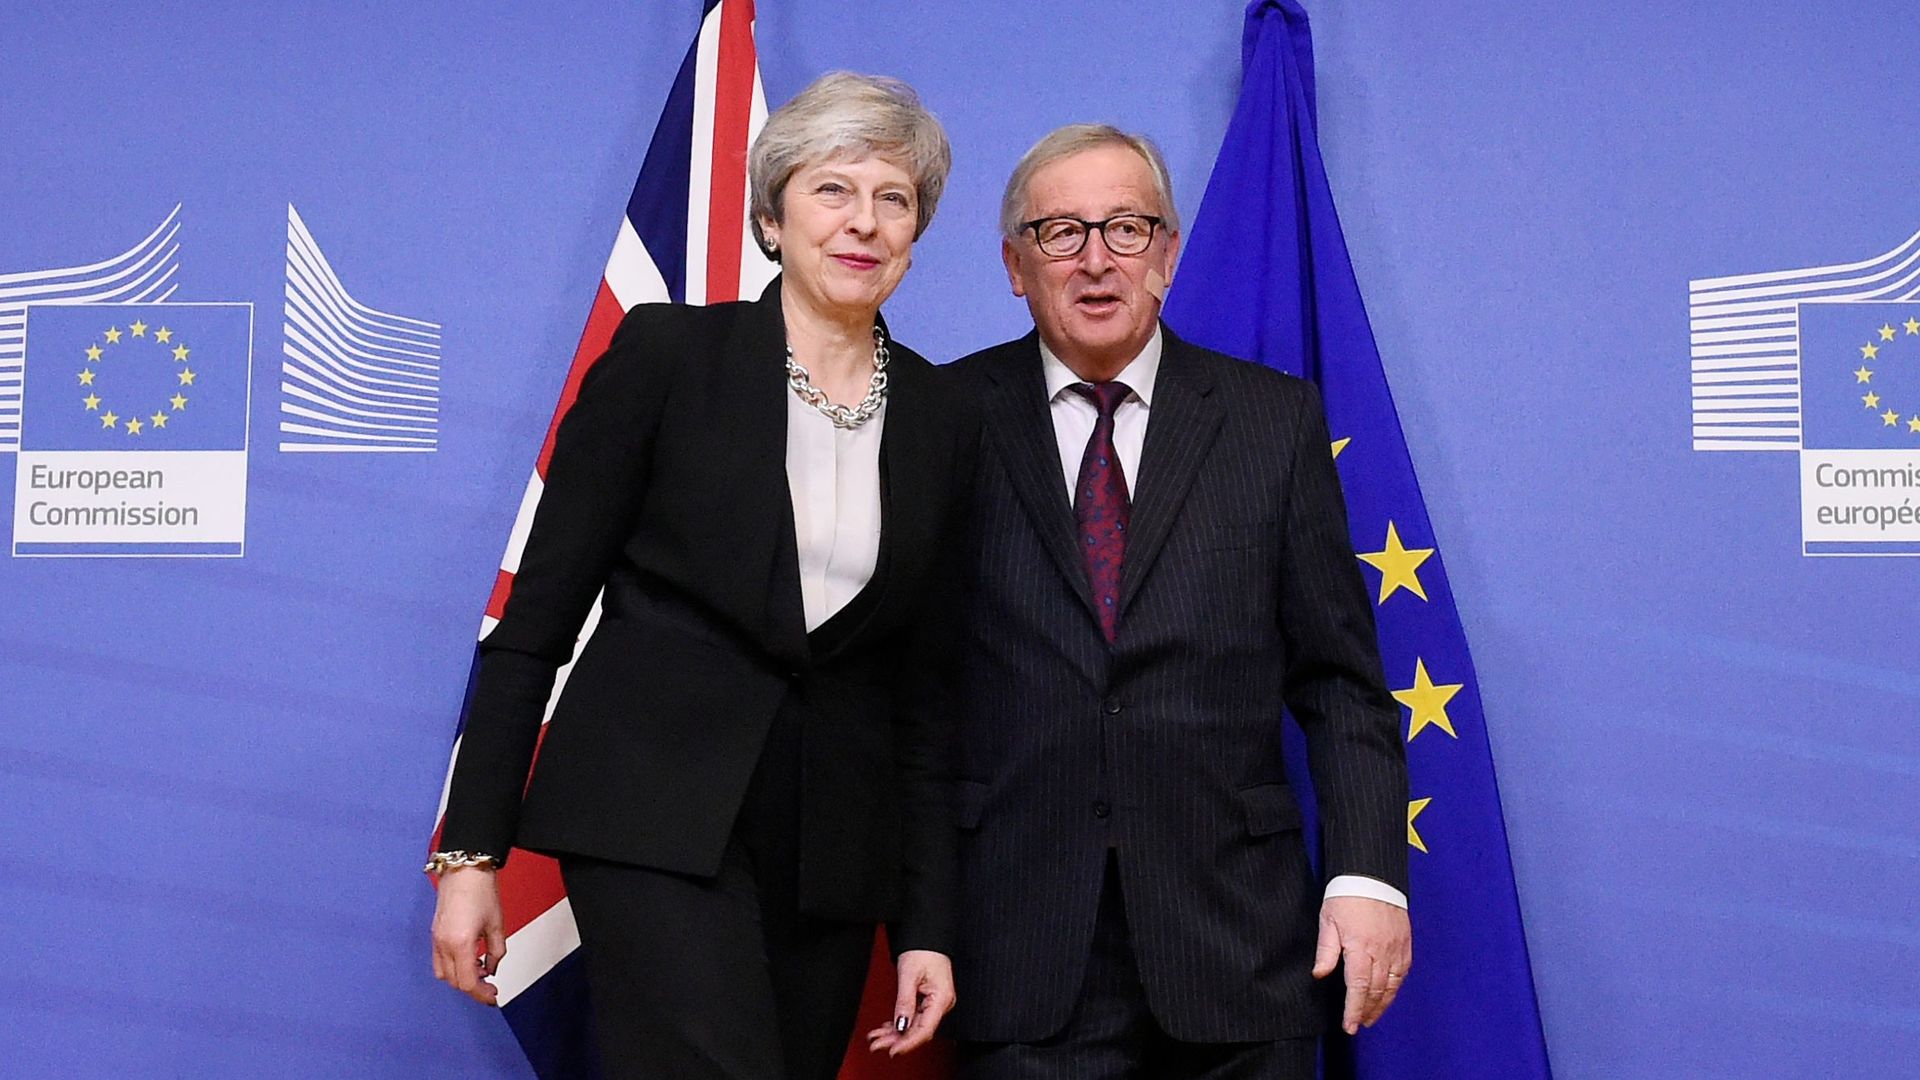 Theresa May spoke with European Commission president Jean-Claude Juncker Sunday evening.